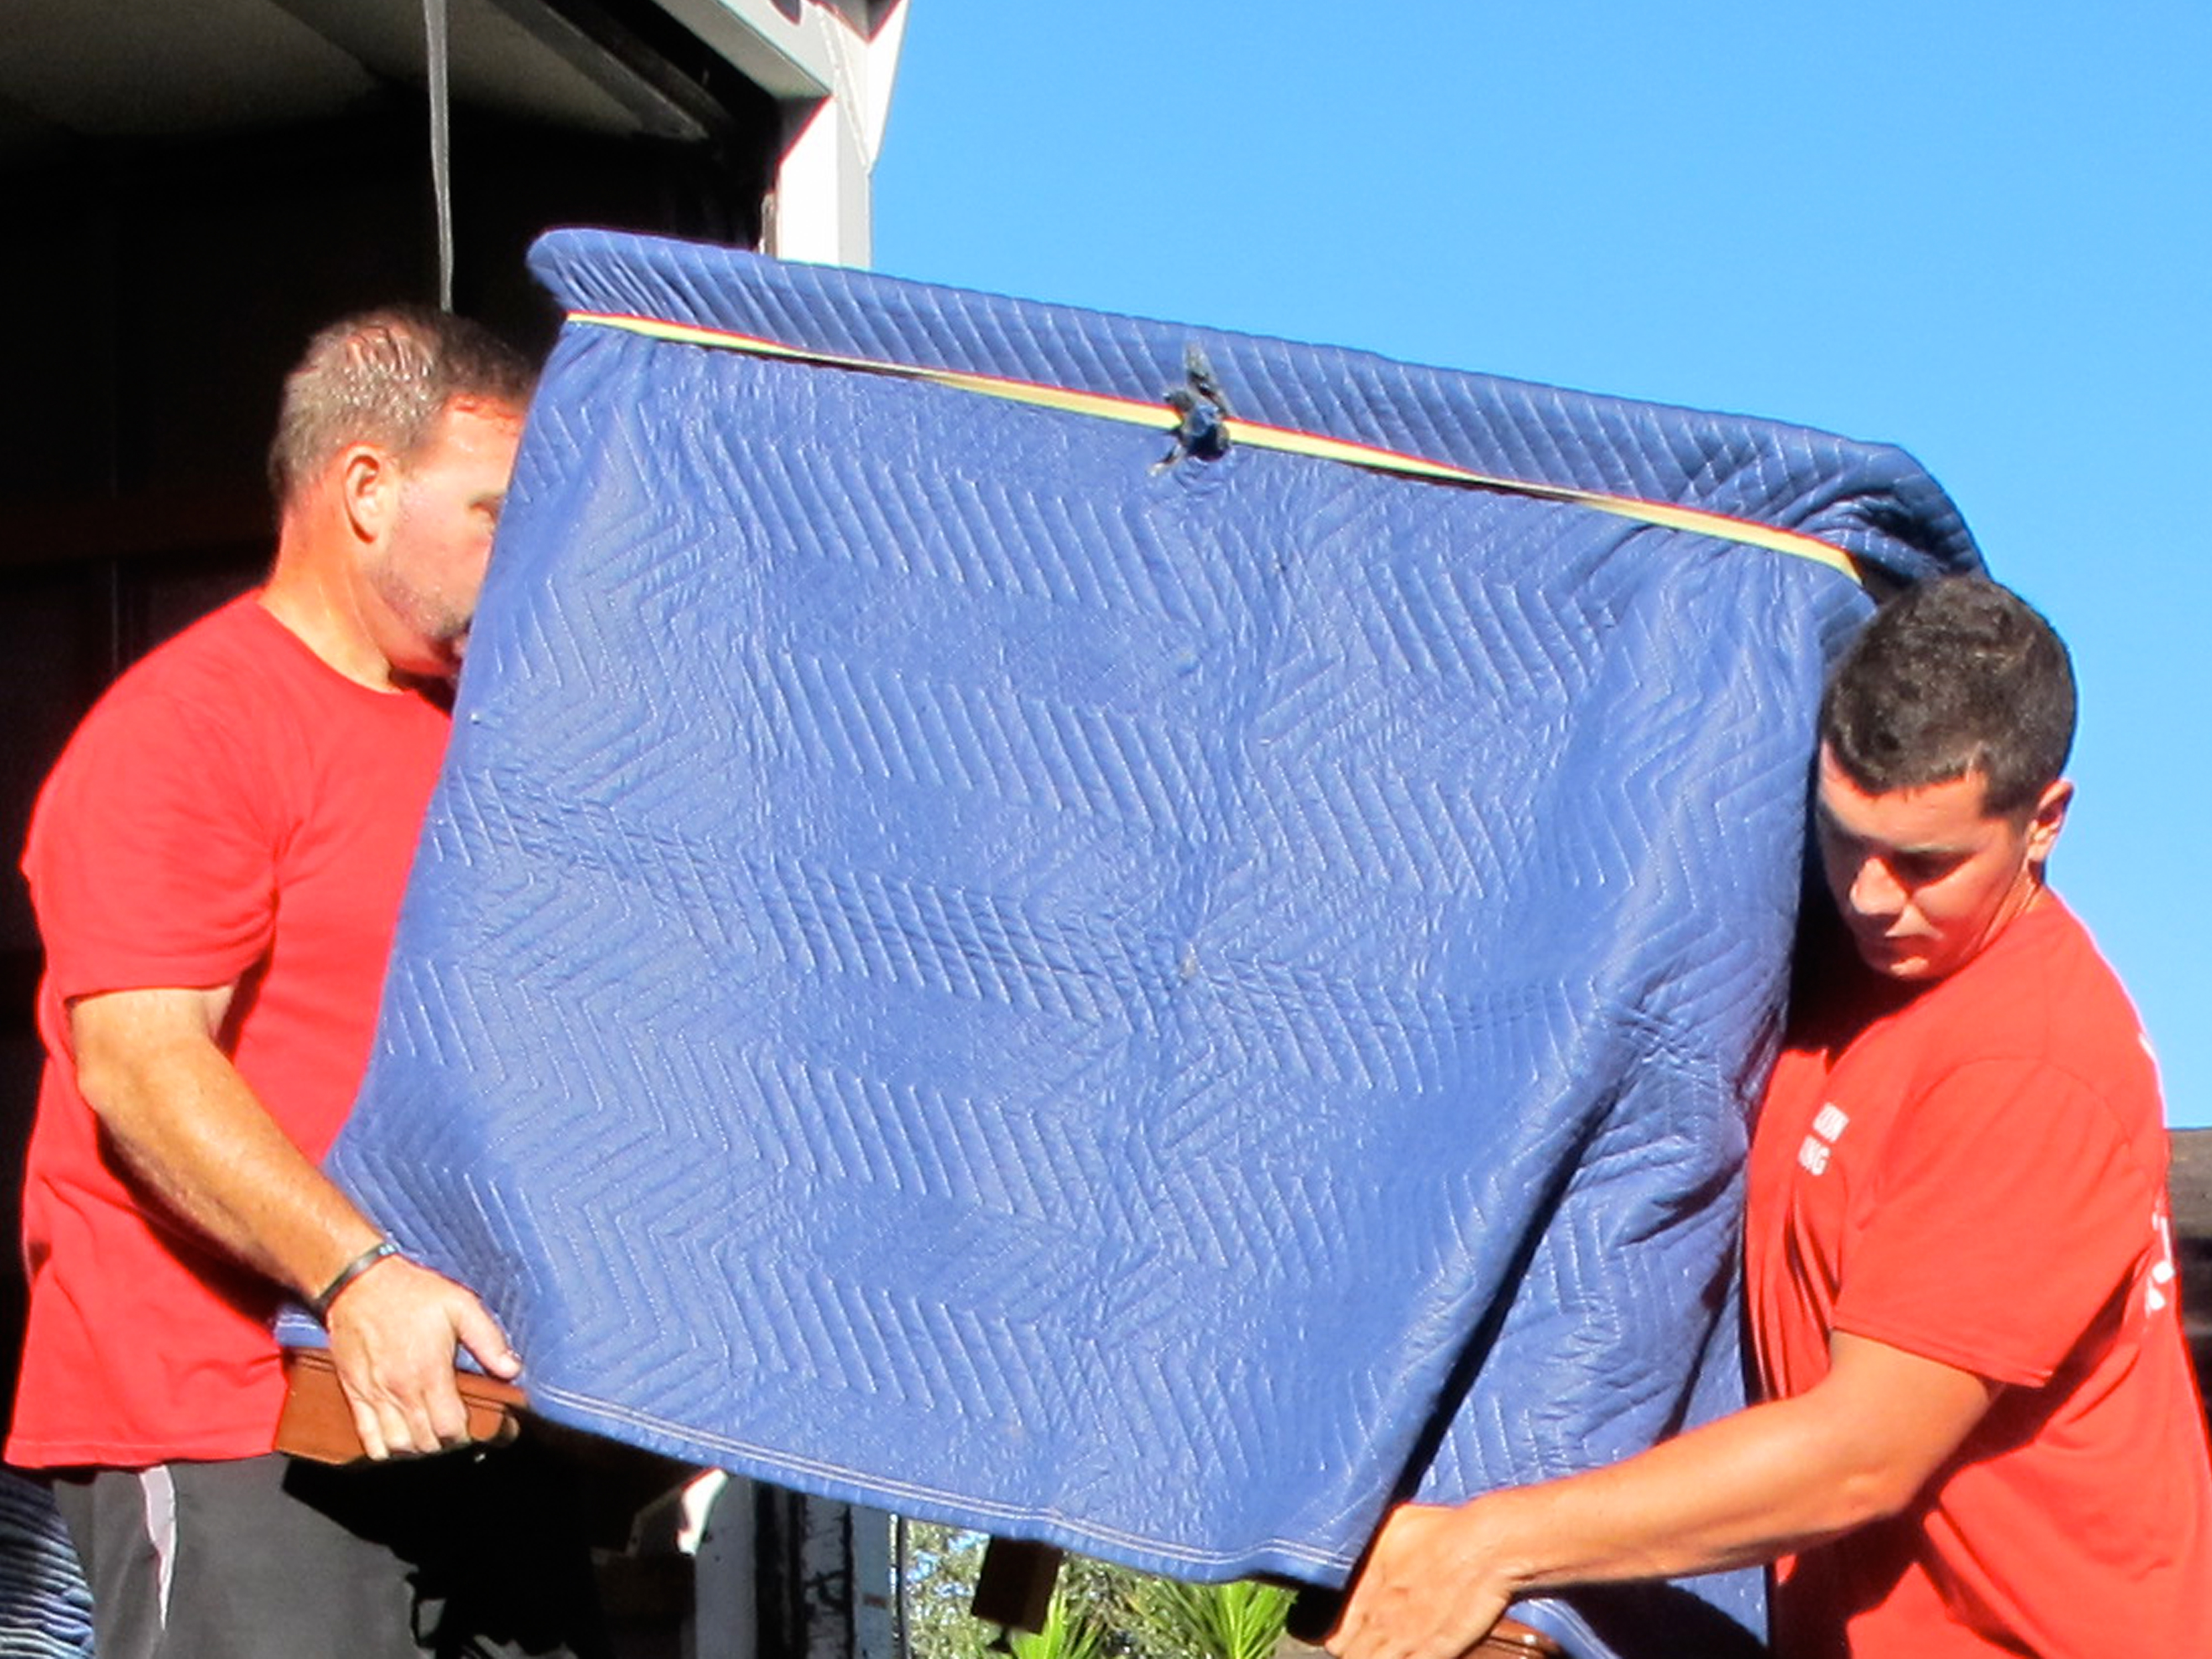 best moving company in sarasota